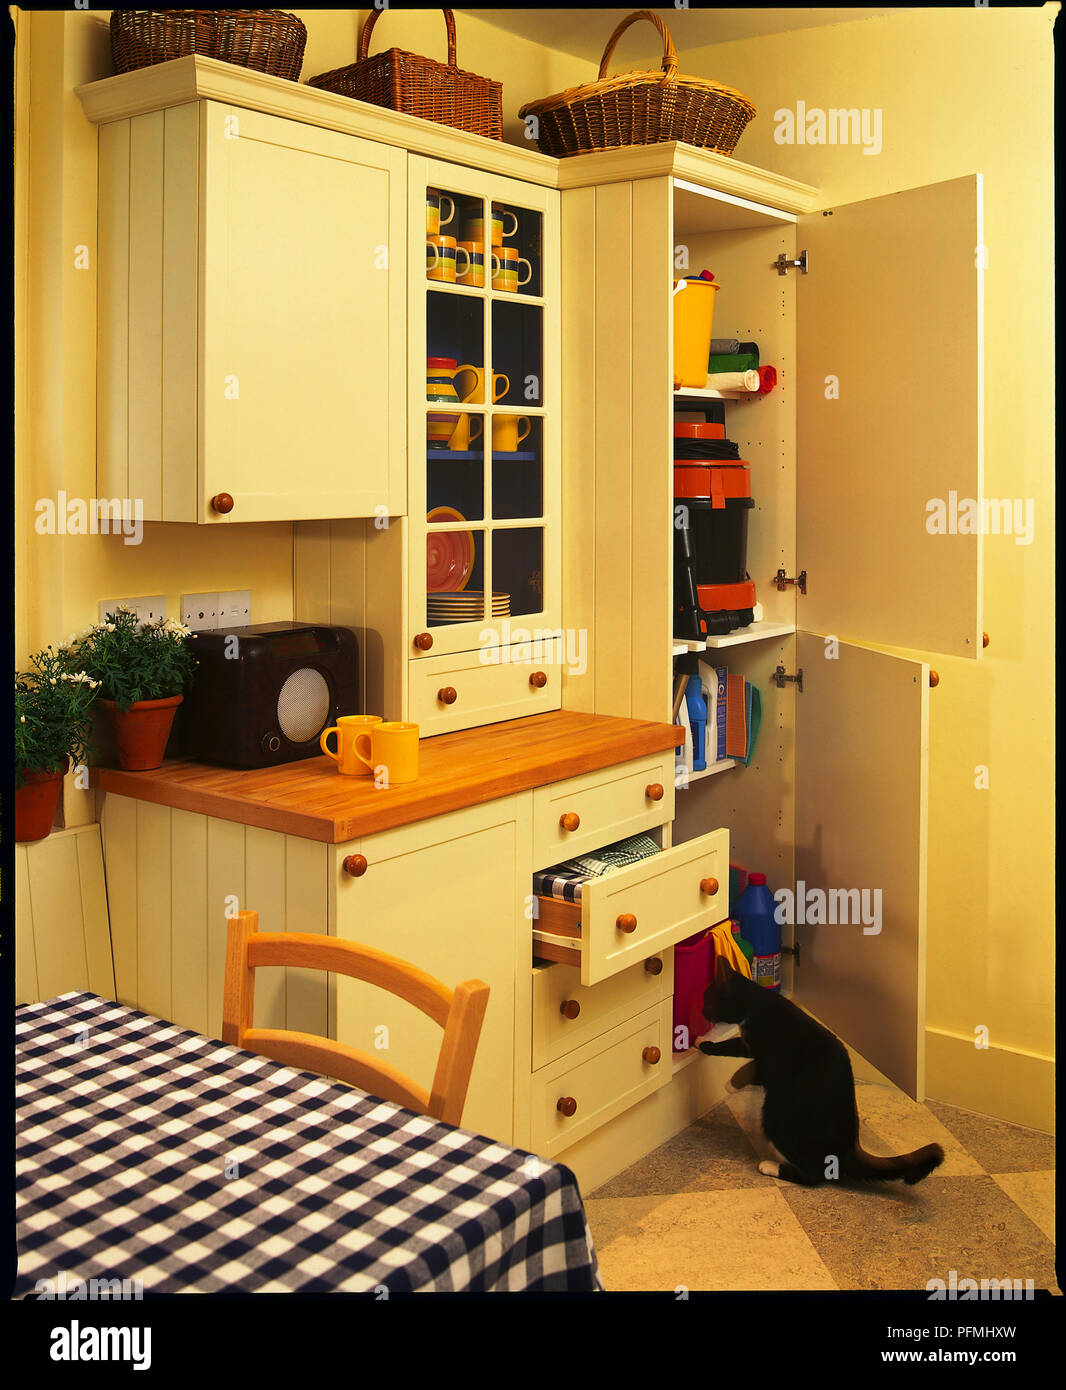 Cat pawing at kitchen utility cupboard. Stock Photo